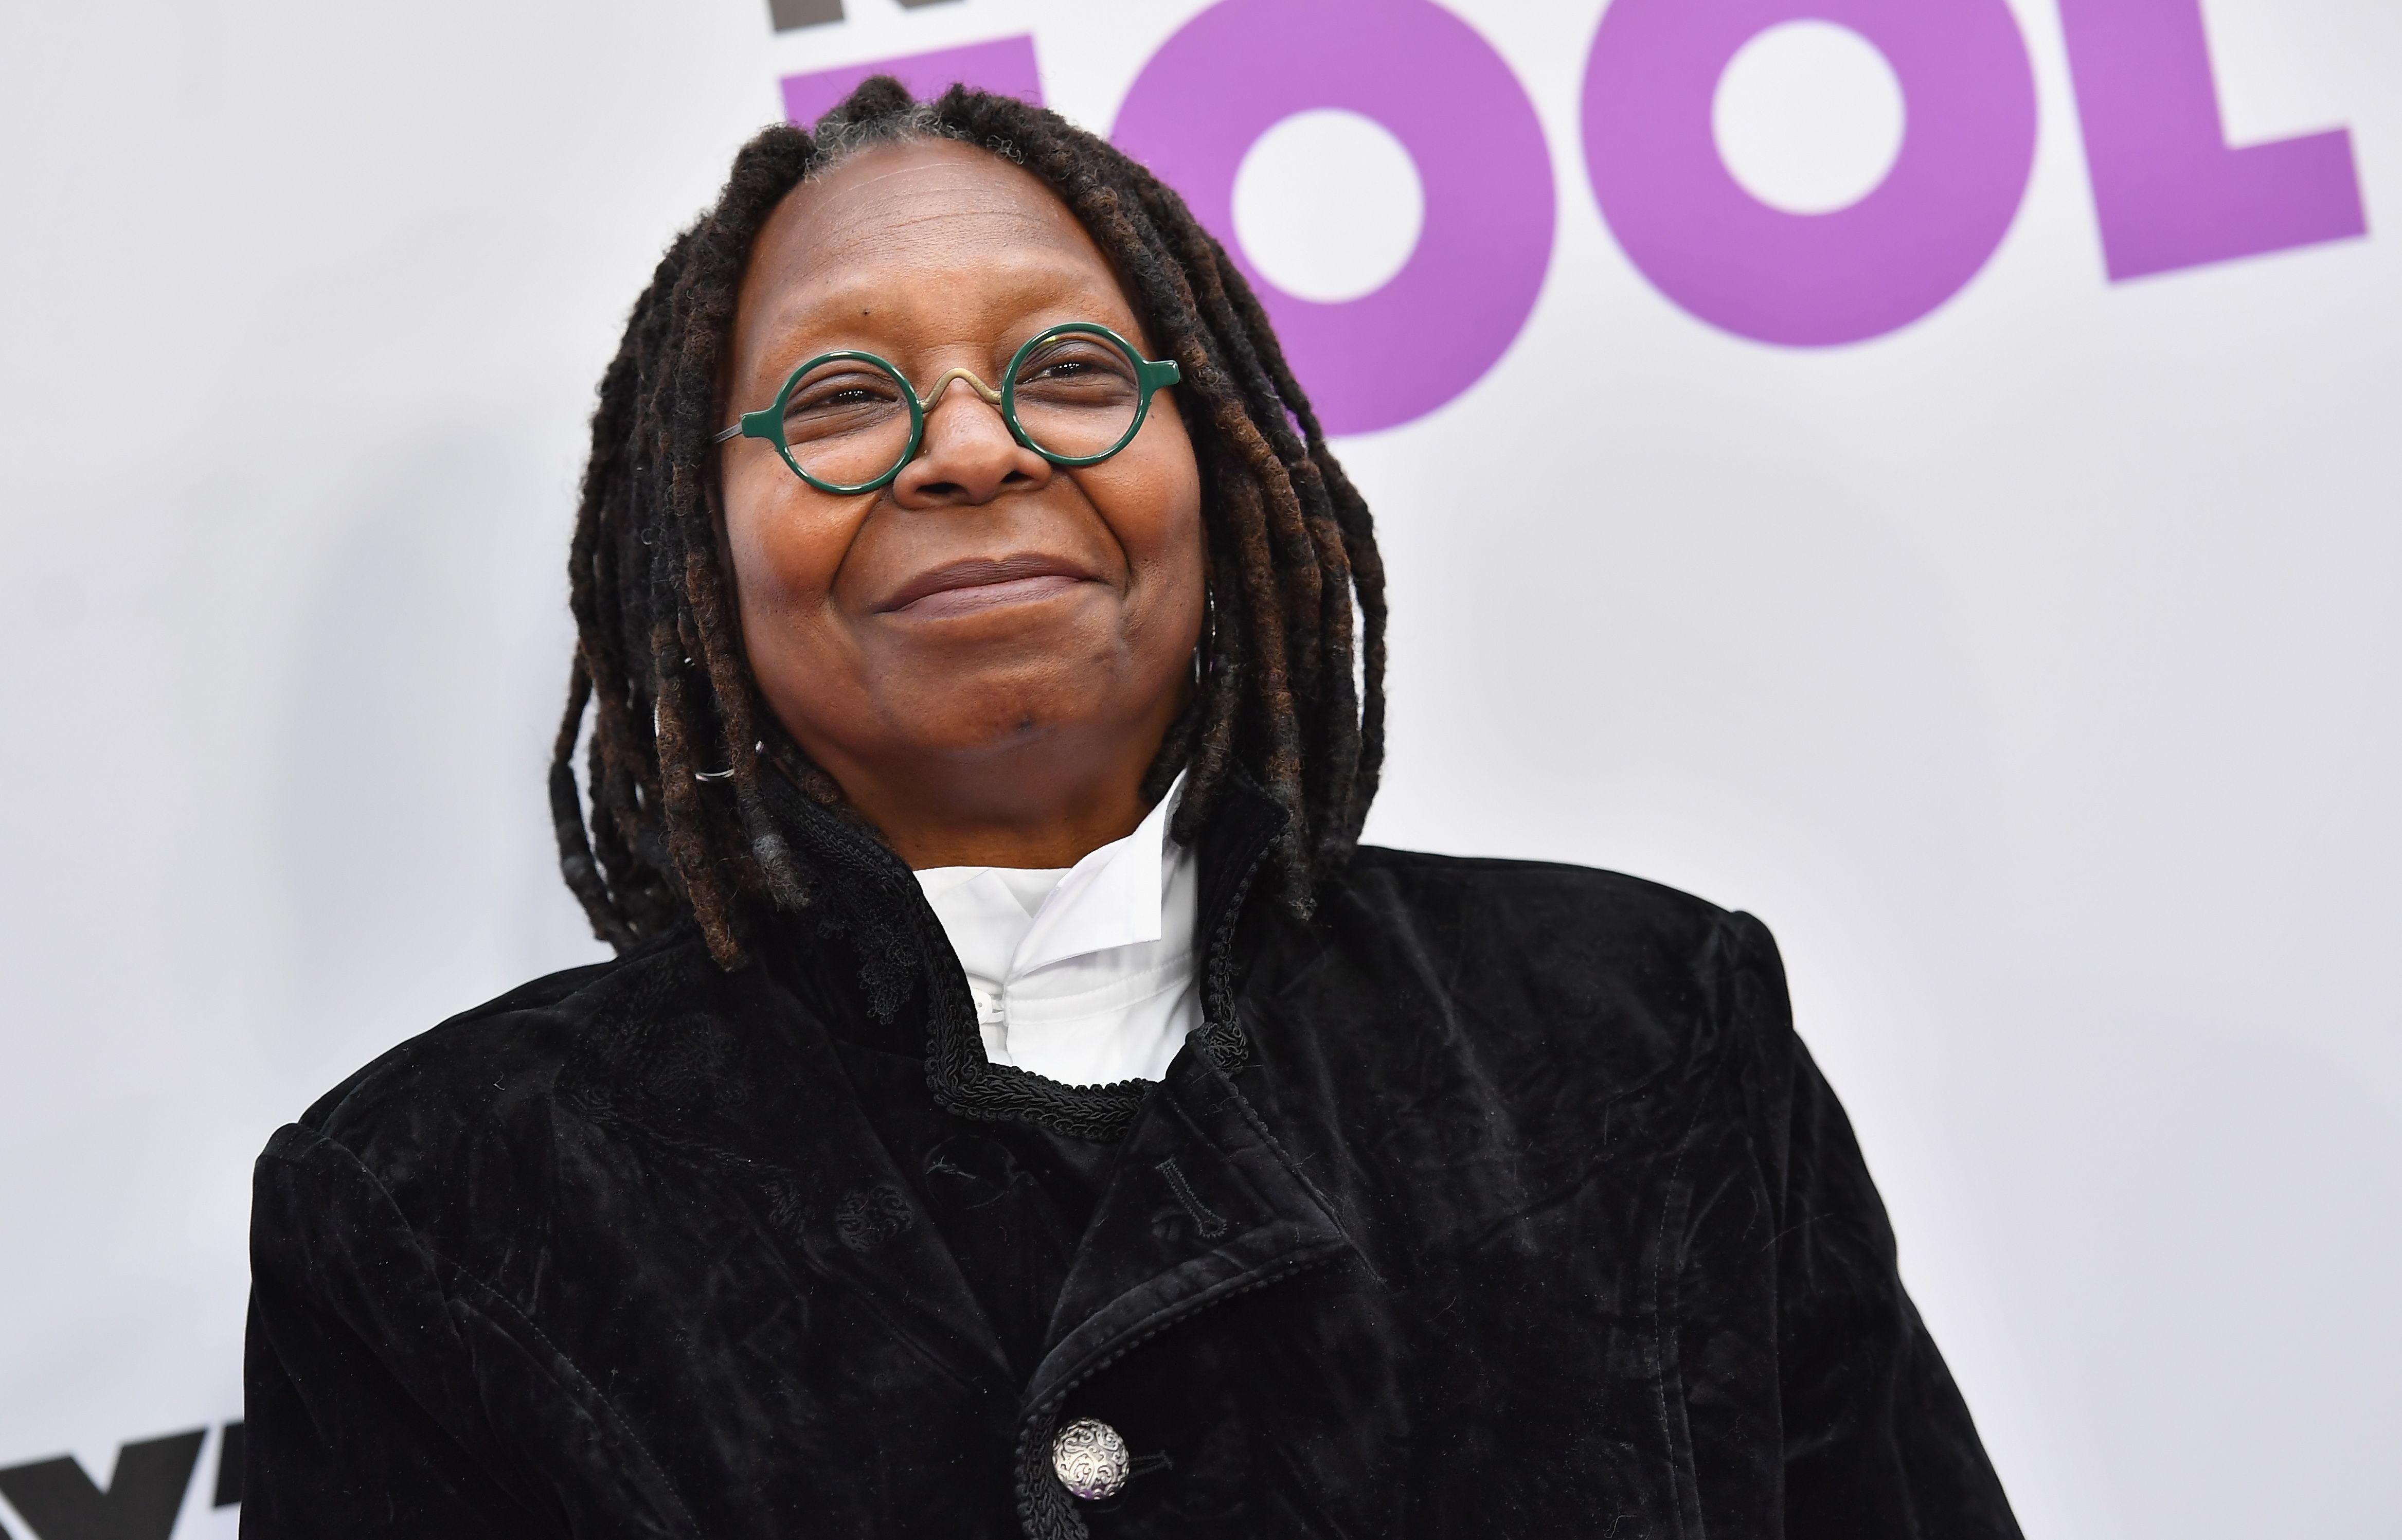 Whoopi Goldberg Net Worth Everyone Want to Know Her Early Life, Career